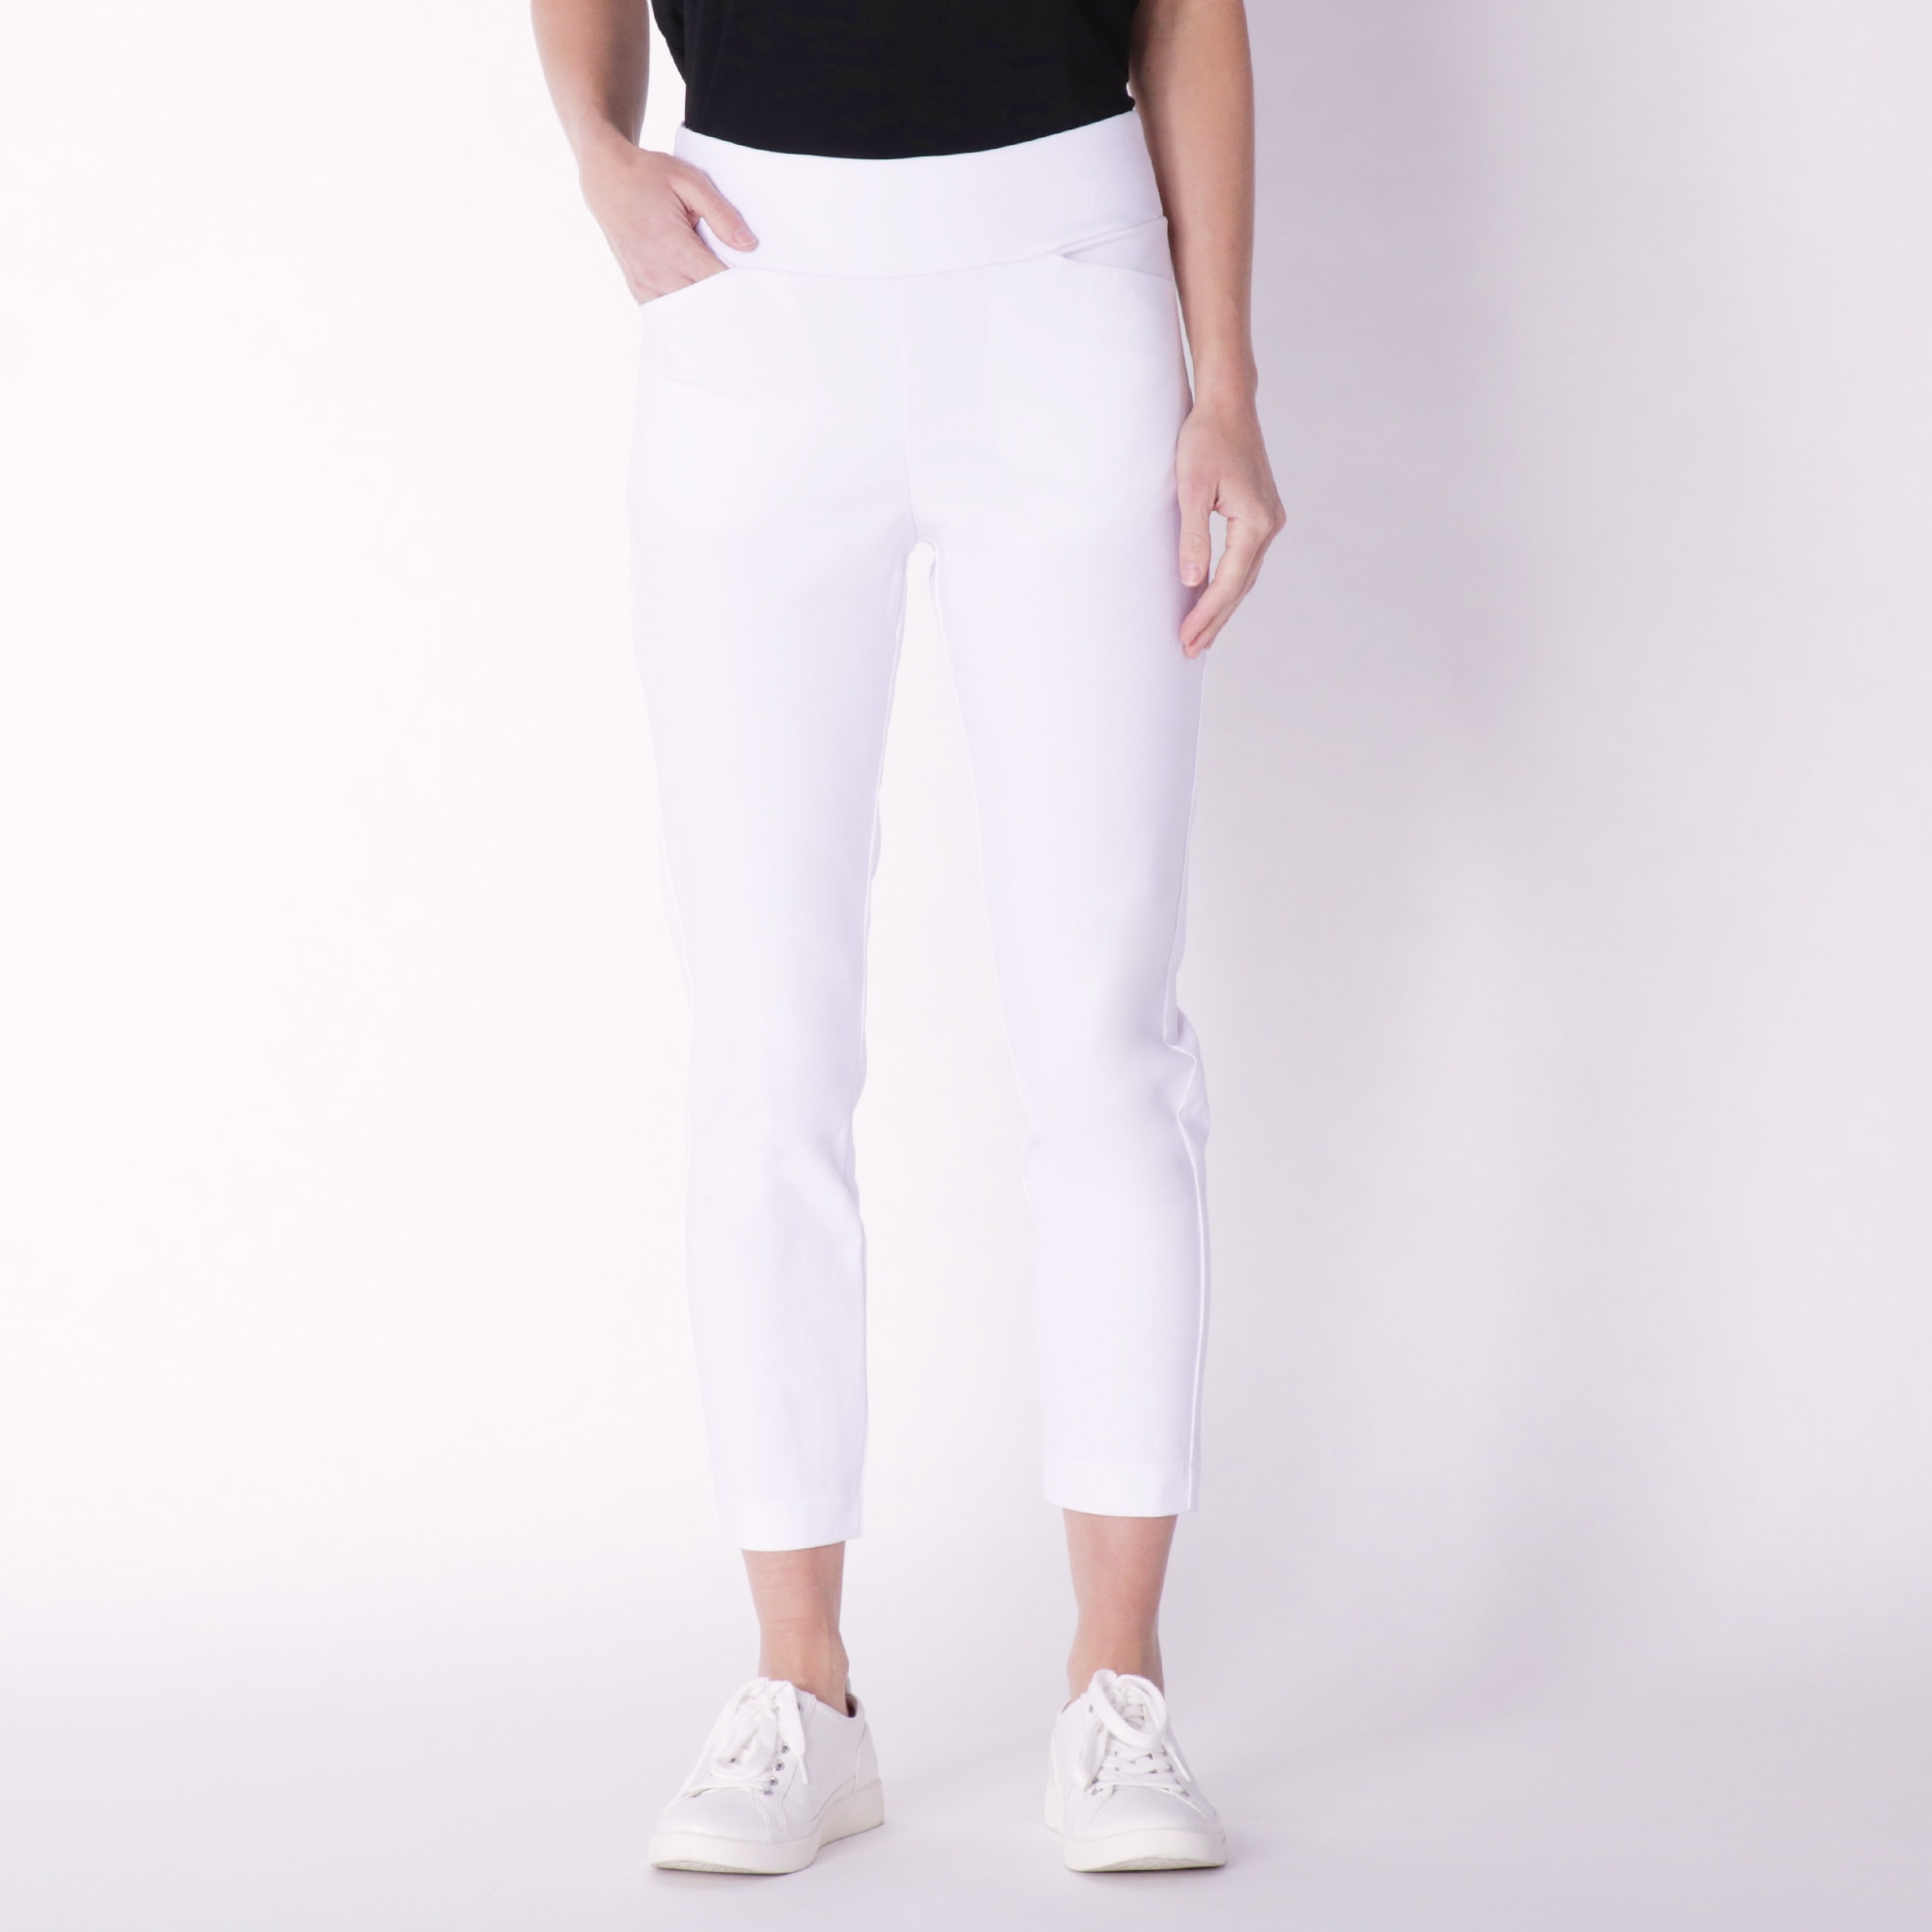 Mr. Max Modern Stretch Ankle Pant